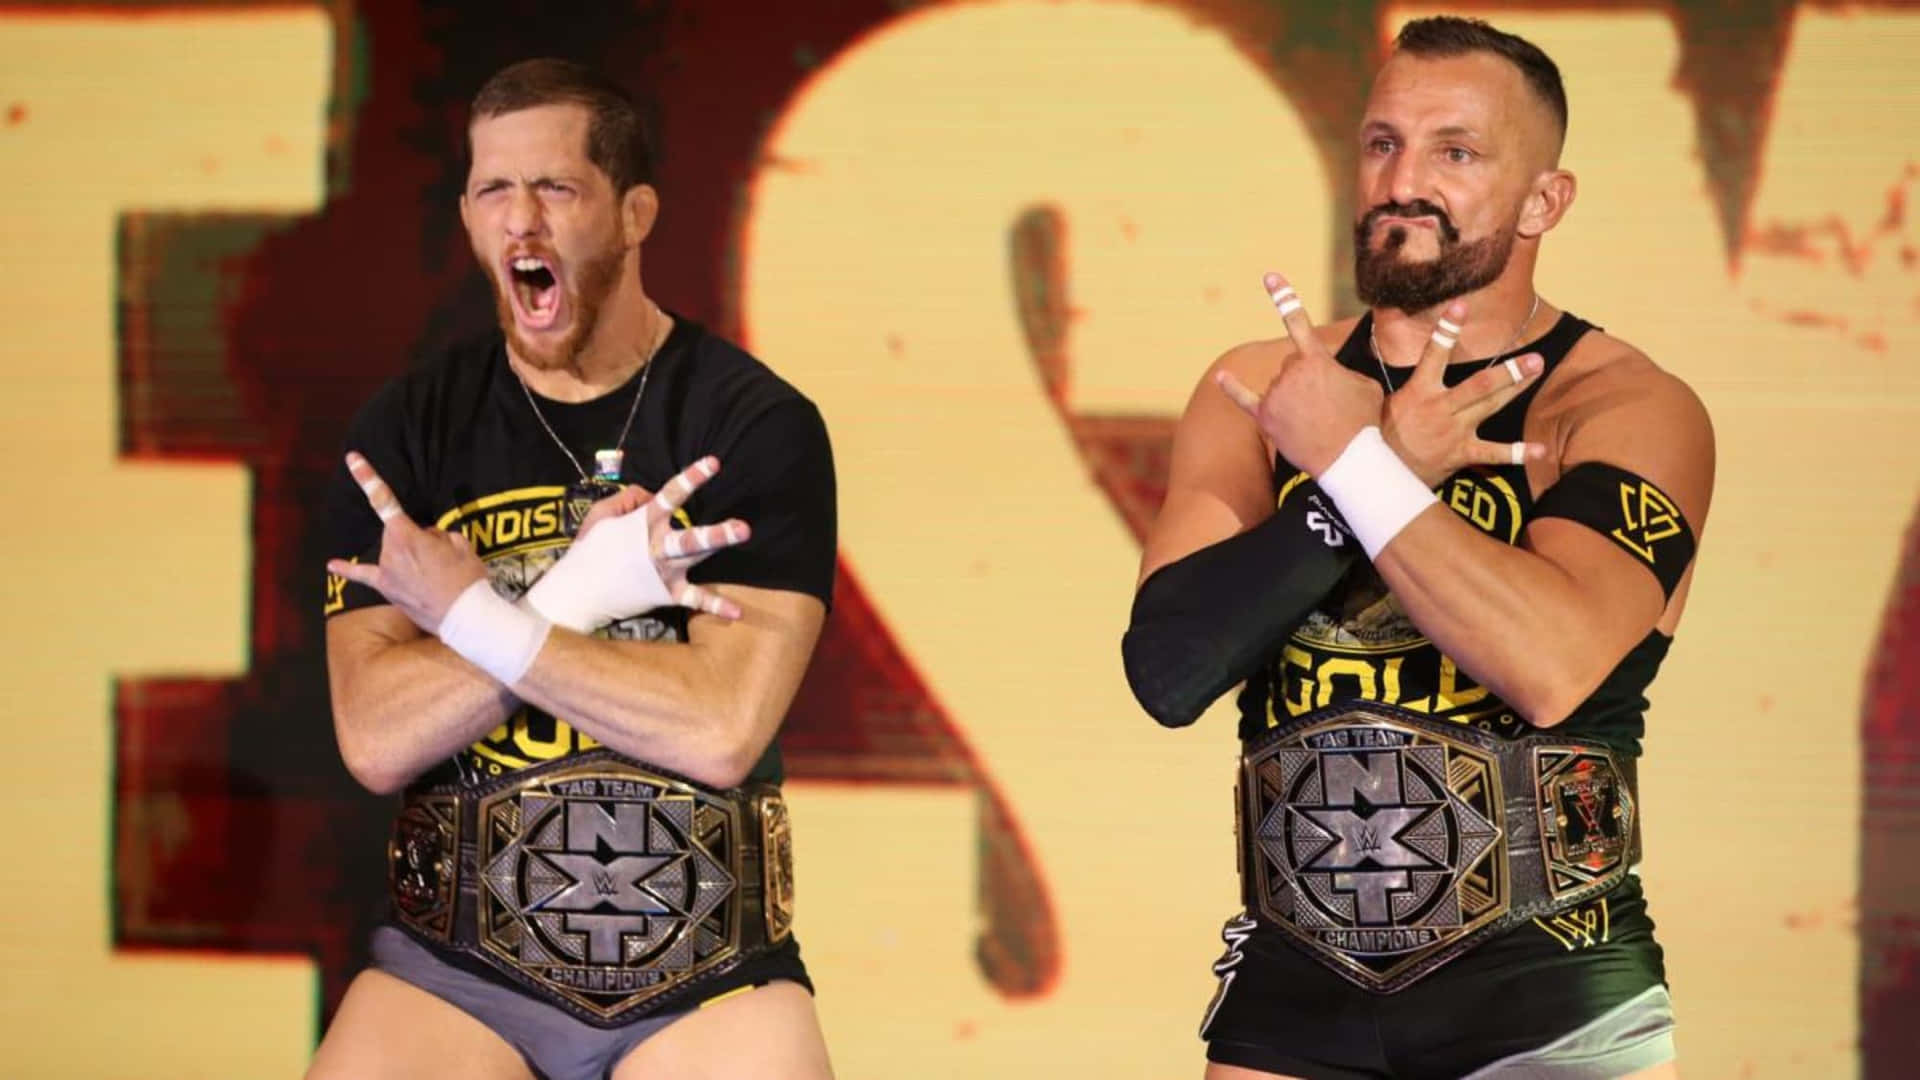 Wrestlers Bobby Fish And Kyle O'Reilly Wallpaper